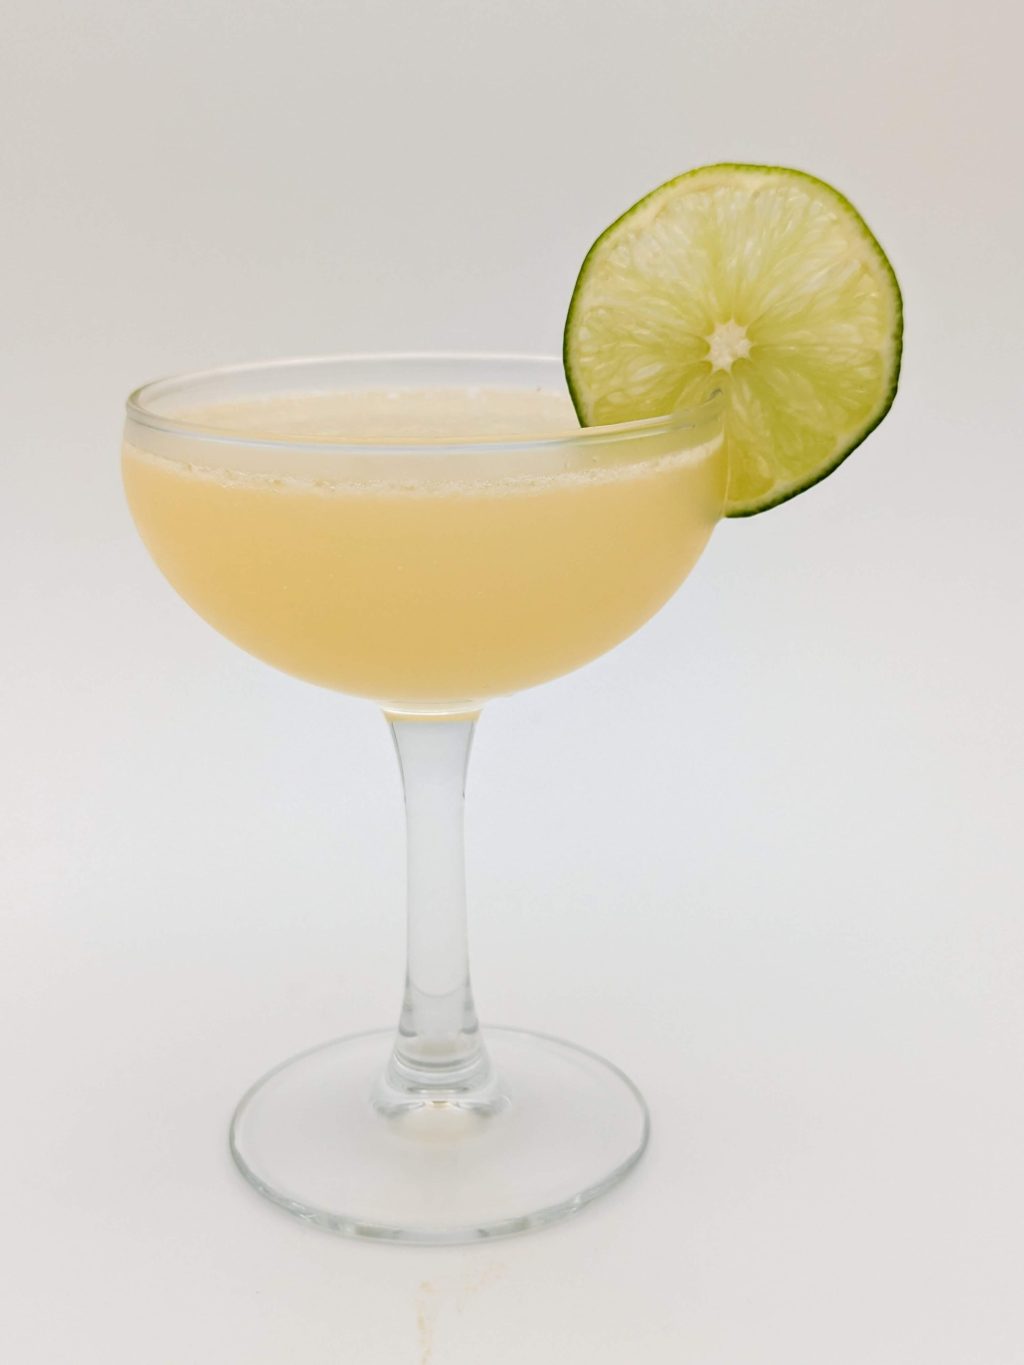 yellow green liquid in a coupe glass with a lime wheel garnish